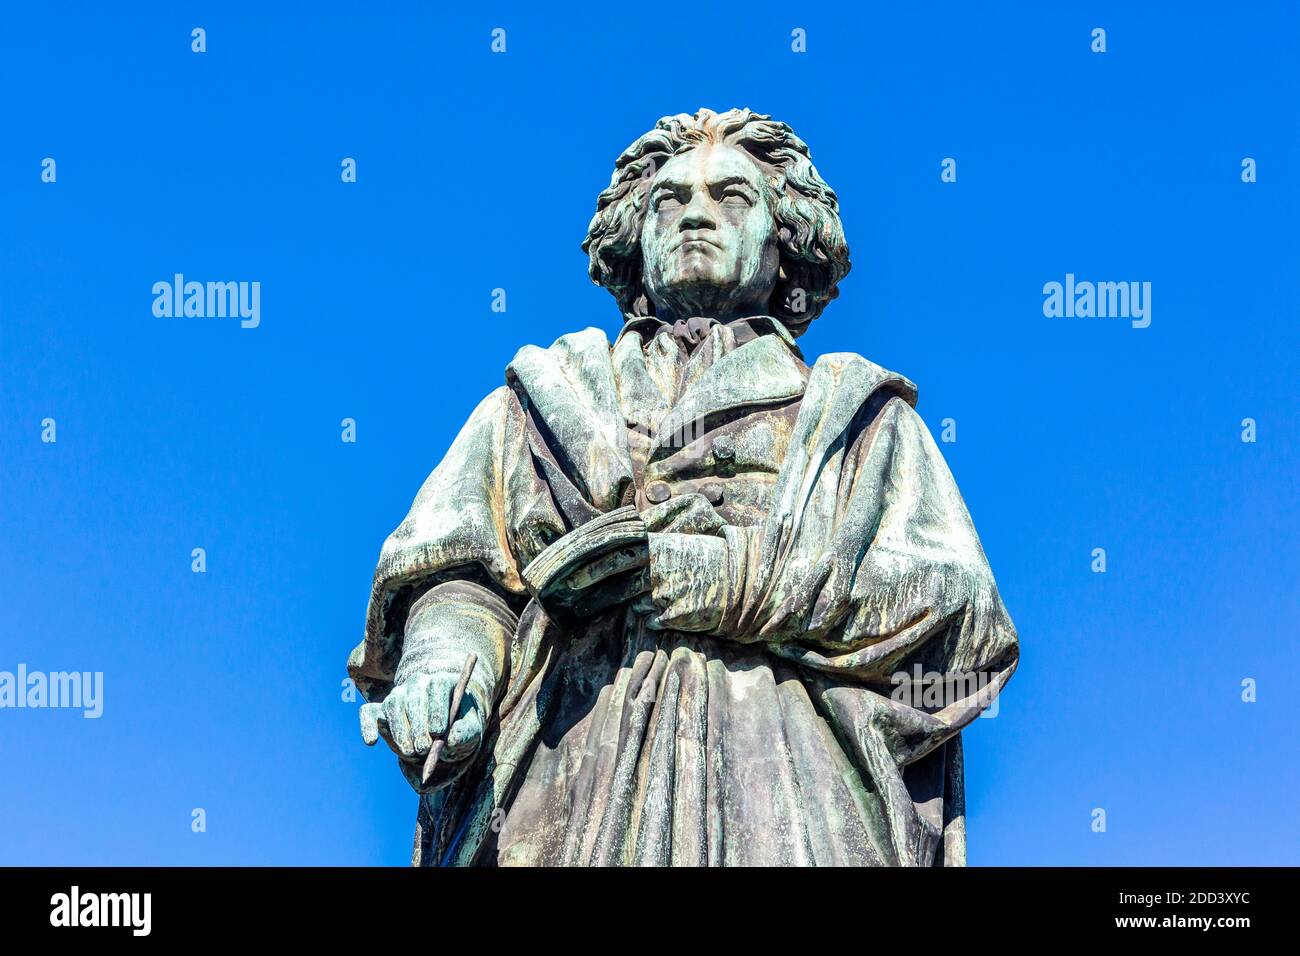 A statue of Ludwig van  Beethoven in Bonn, Germany, where he was born.. Stock Photo